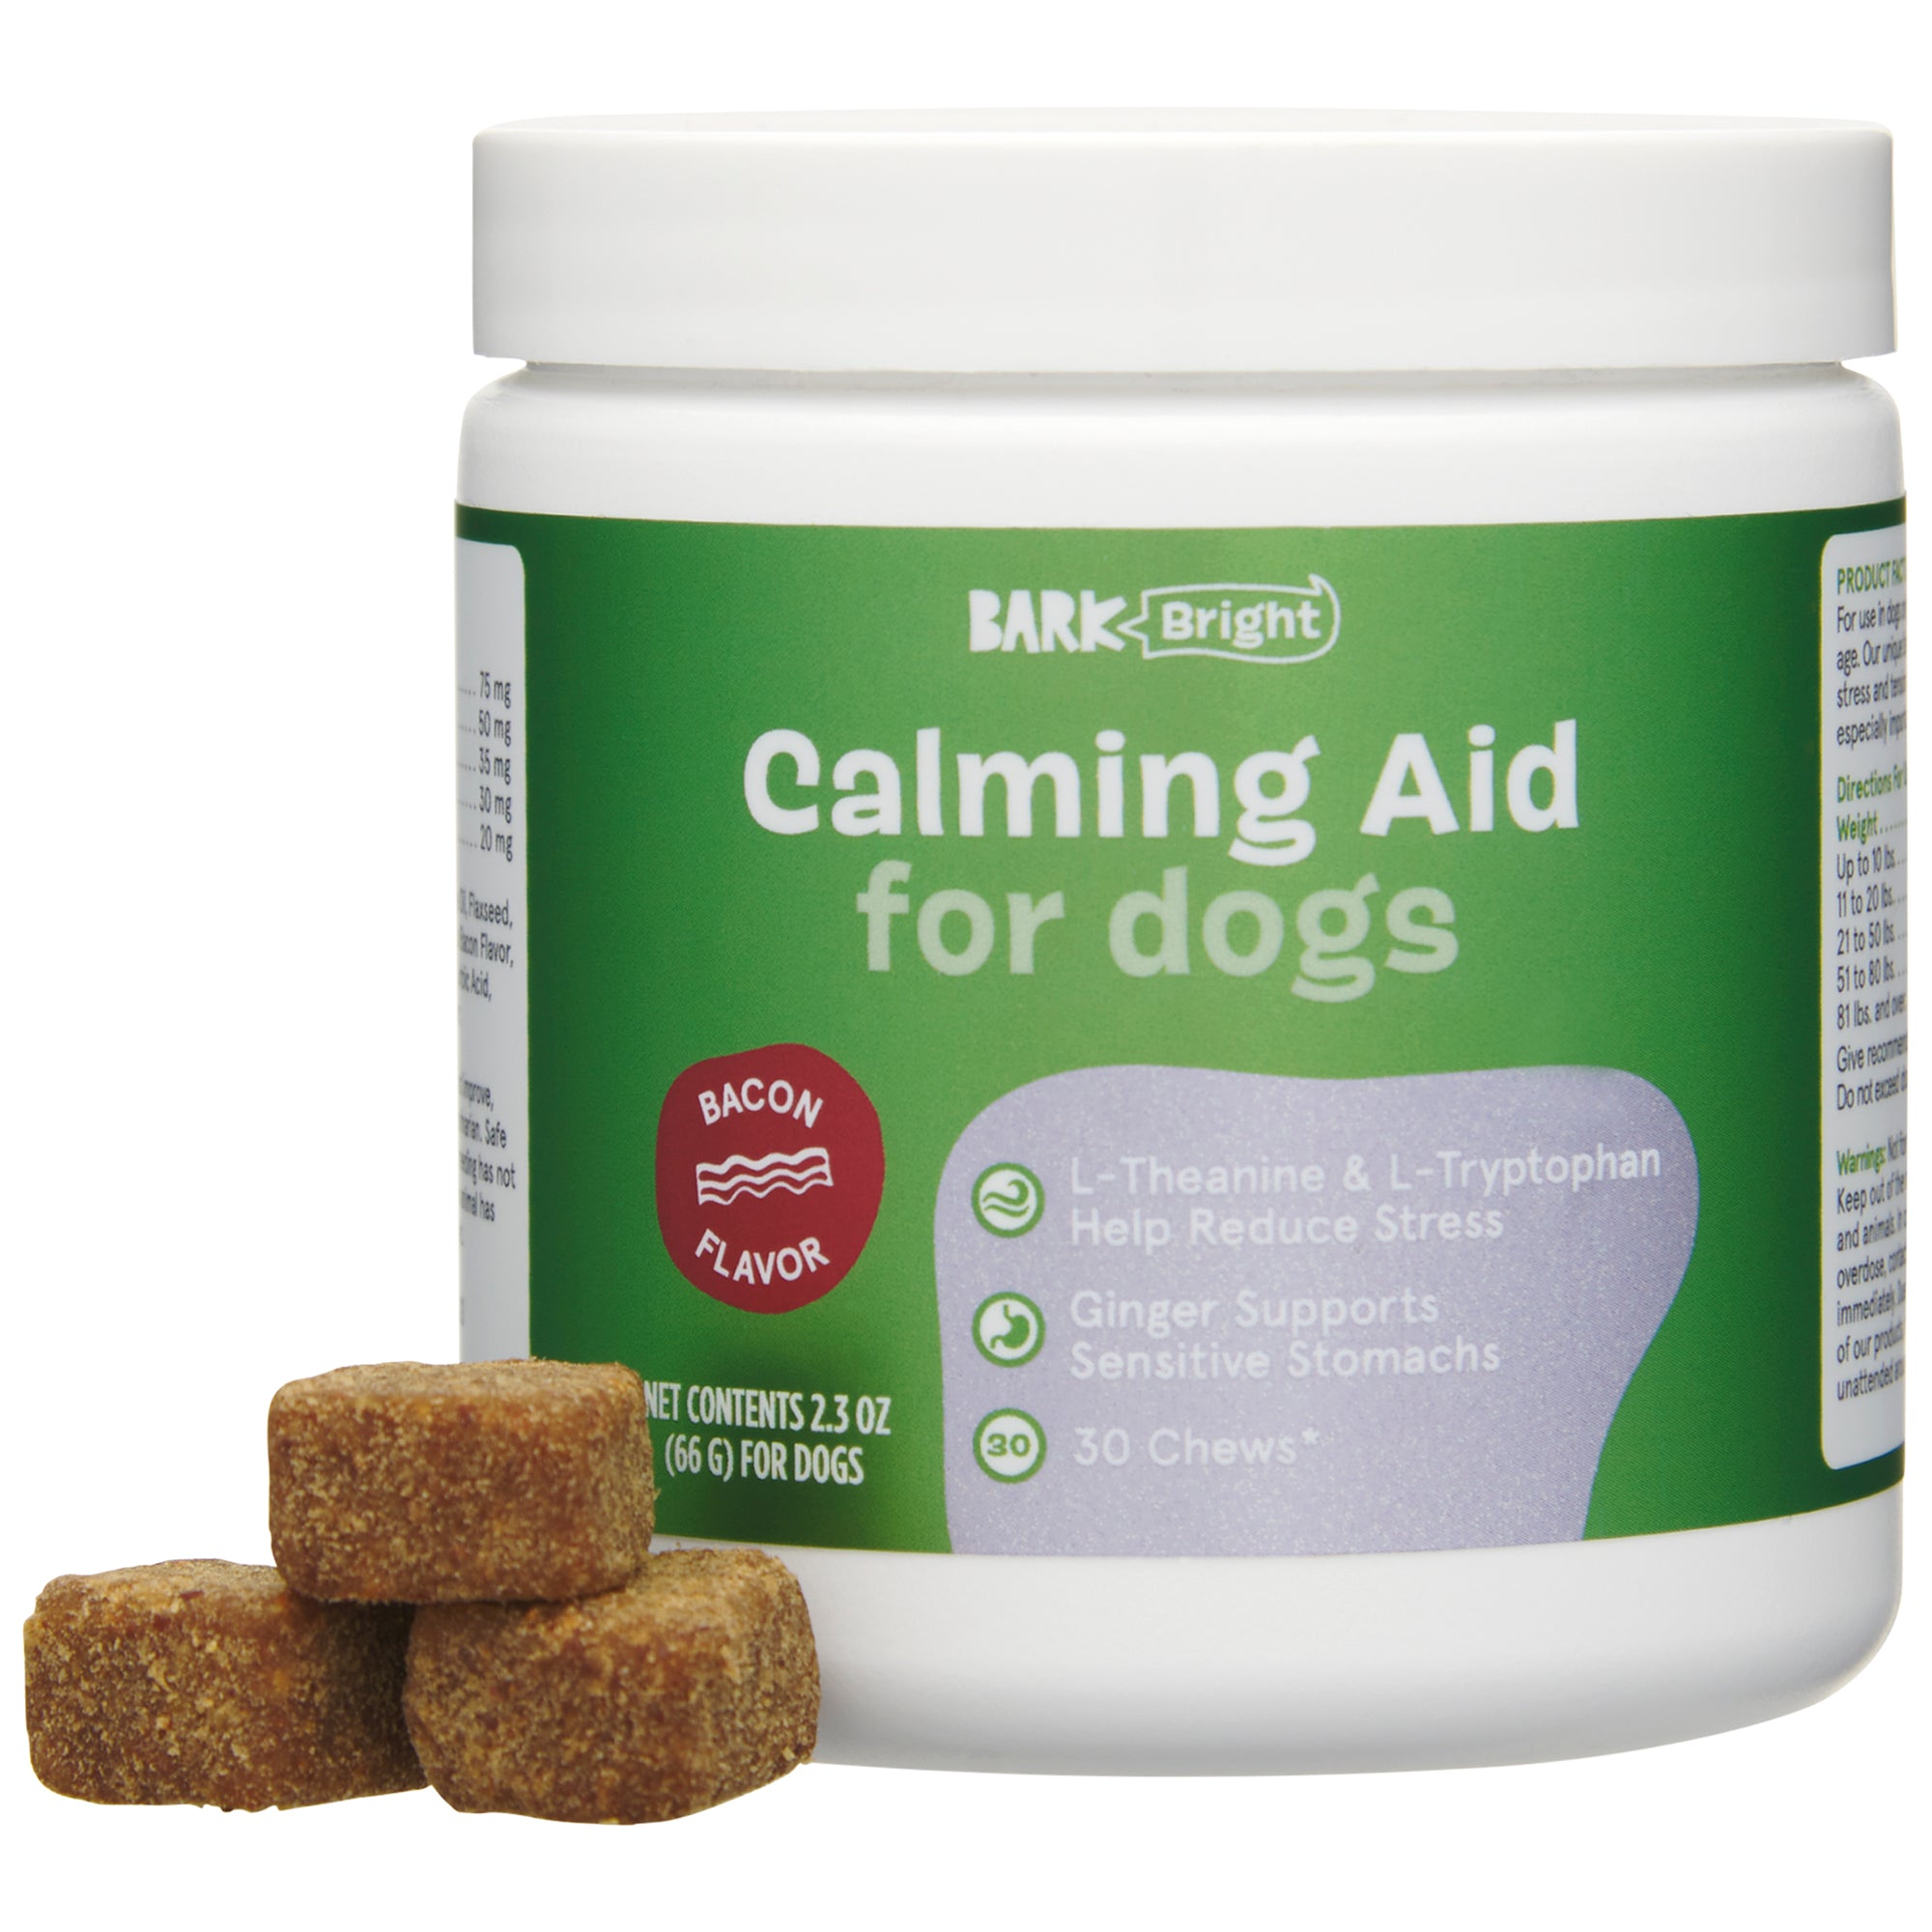 Calming Aid For Dogs